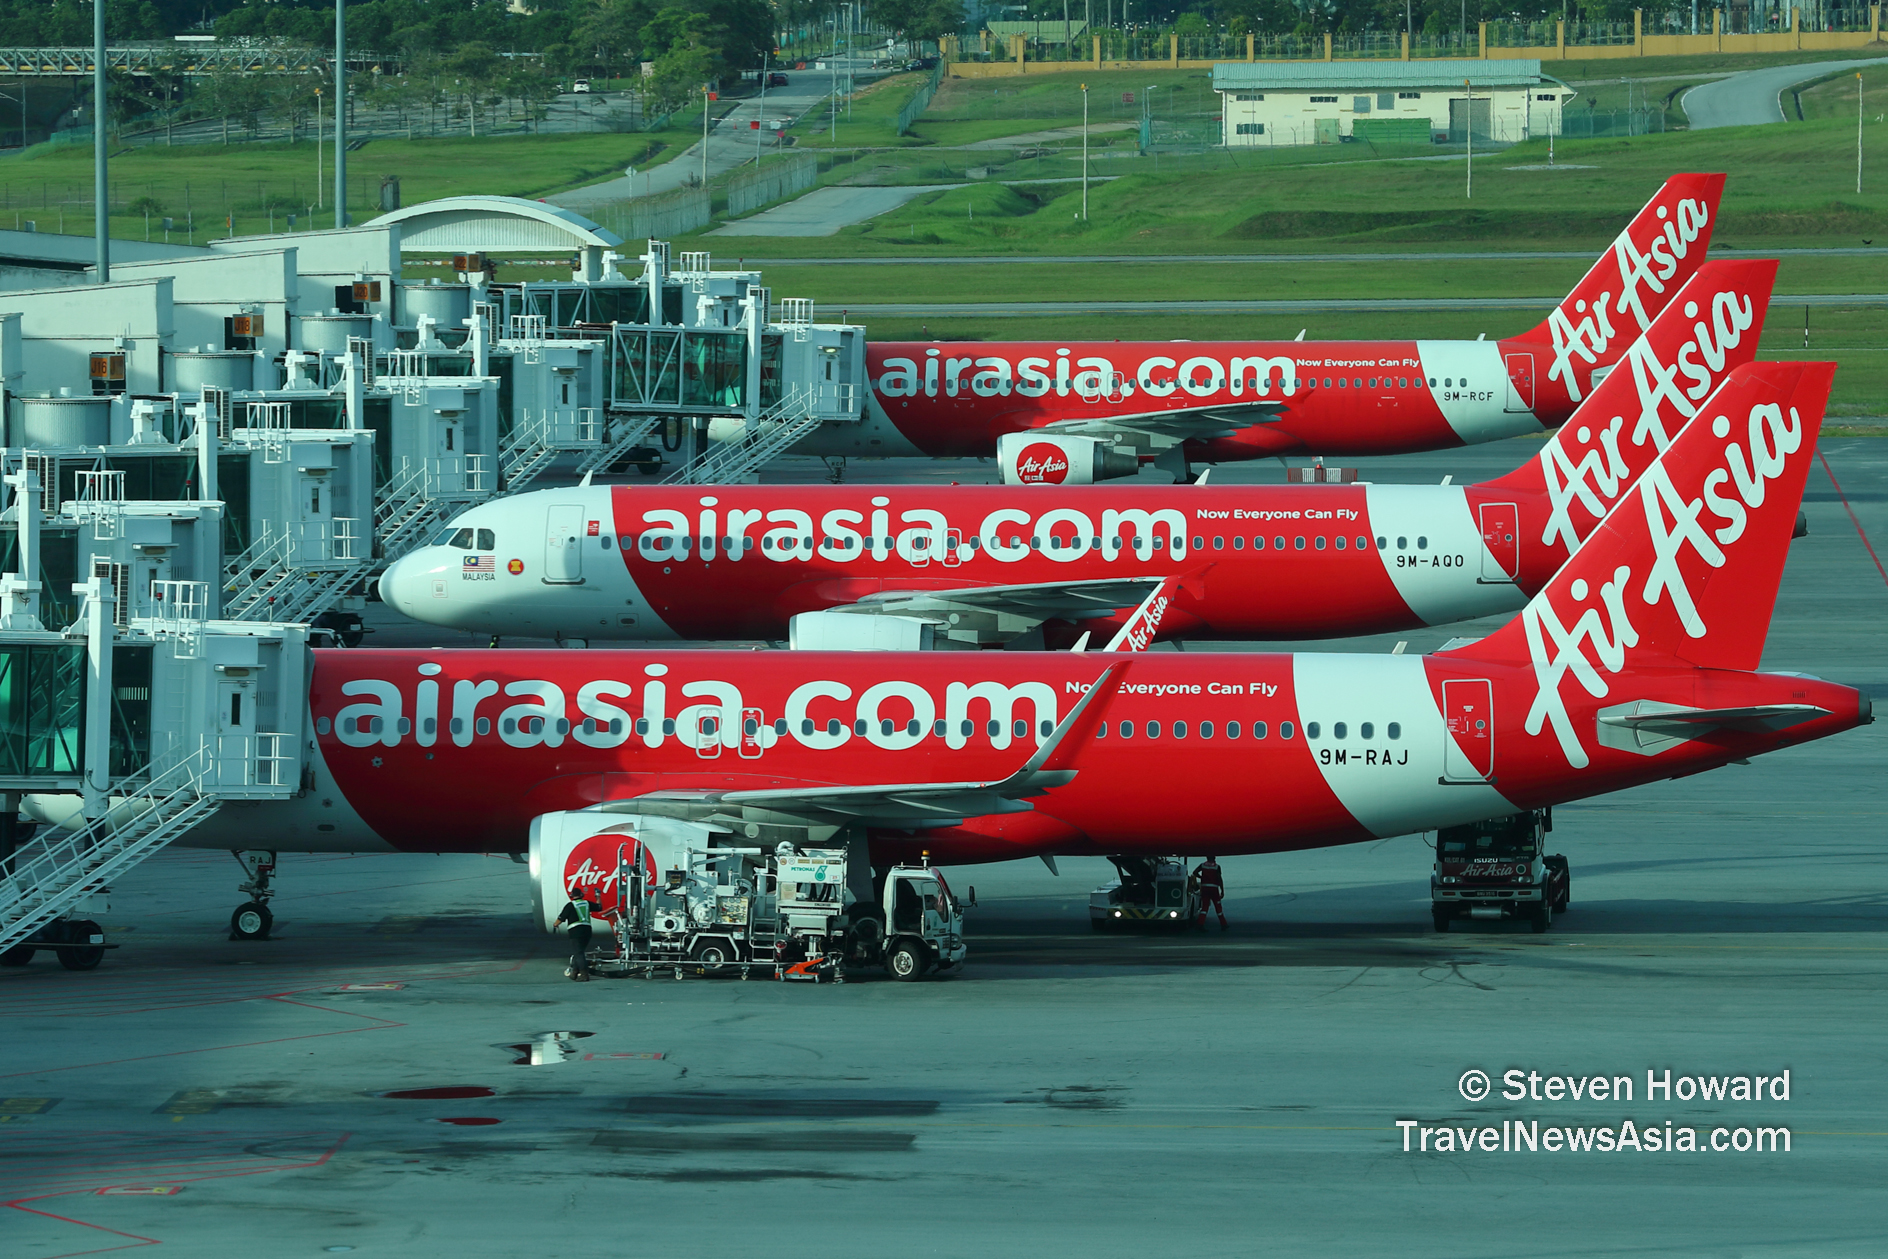 AirAsia A320s at klia2. Picture by Steven Howard of TravelNewsAsia.com Click to enlarge.